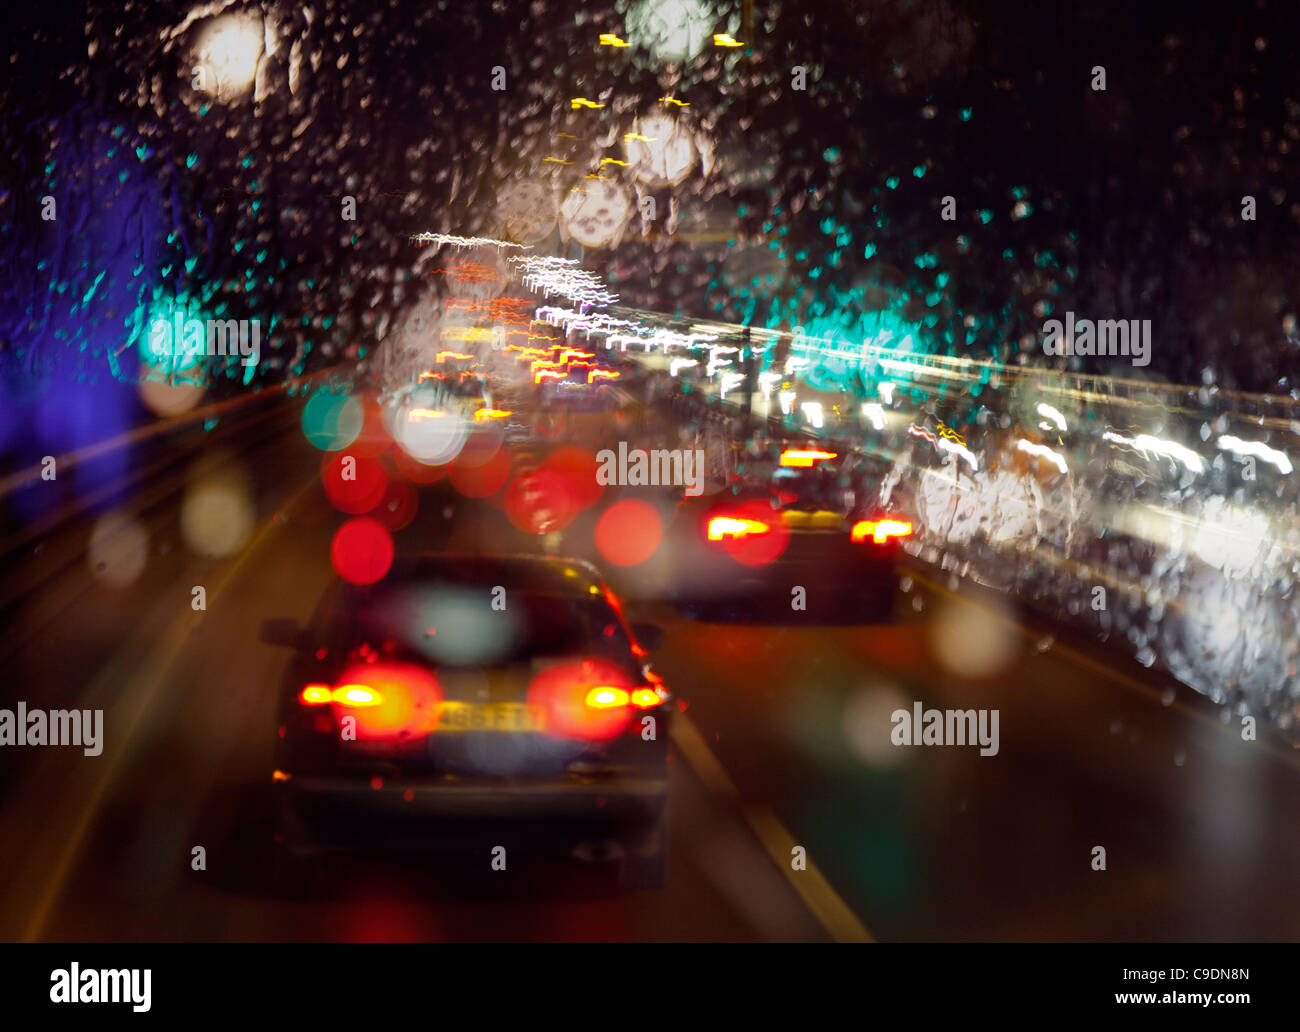 Late night wet rain on windscreen poor visibility while driving out of London in evening rush hour in heavy traffic Stock Photo